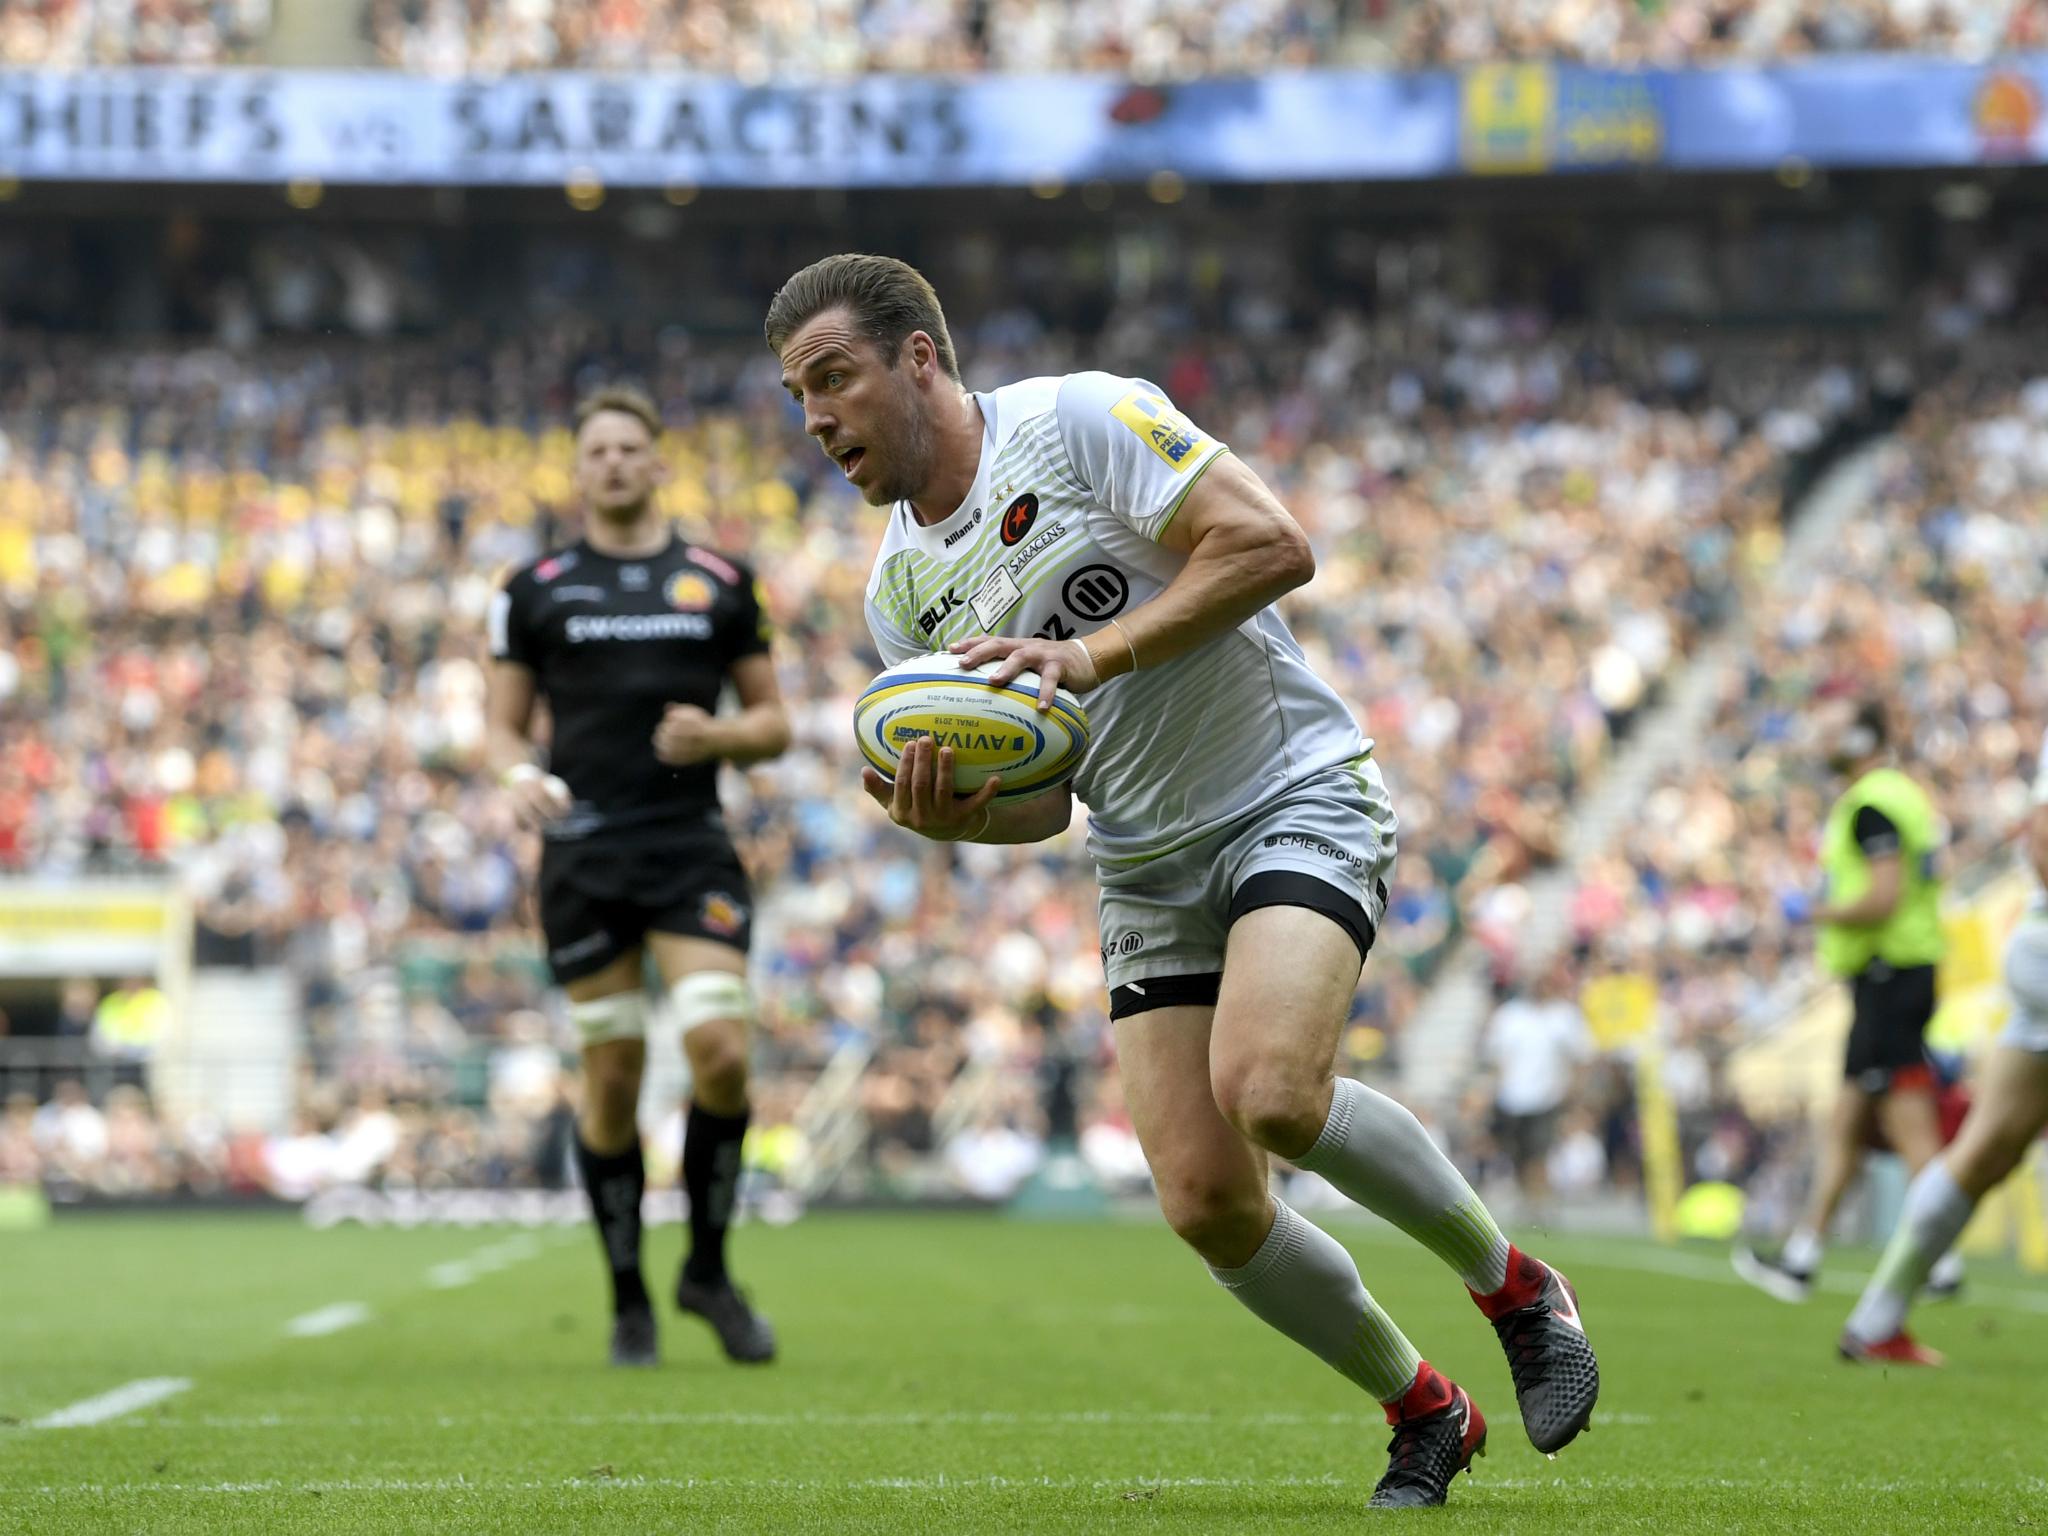 Chris Wyles scores the second try for Saracens in the Premiership final against Exeter